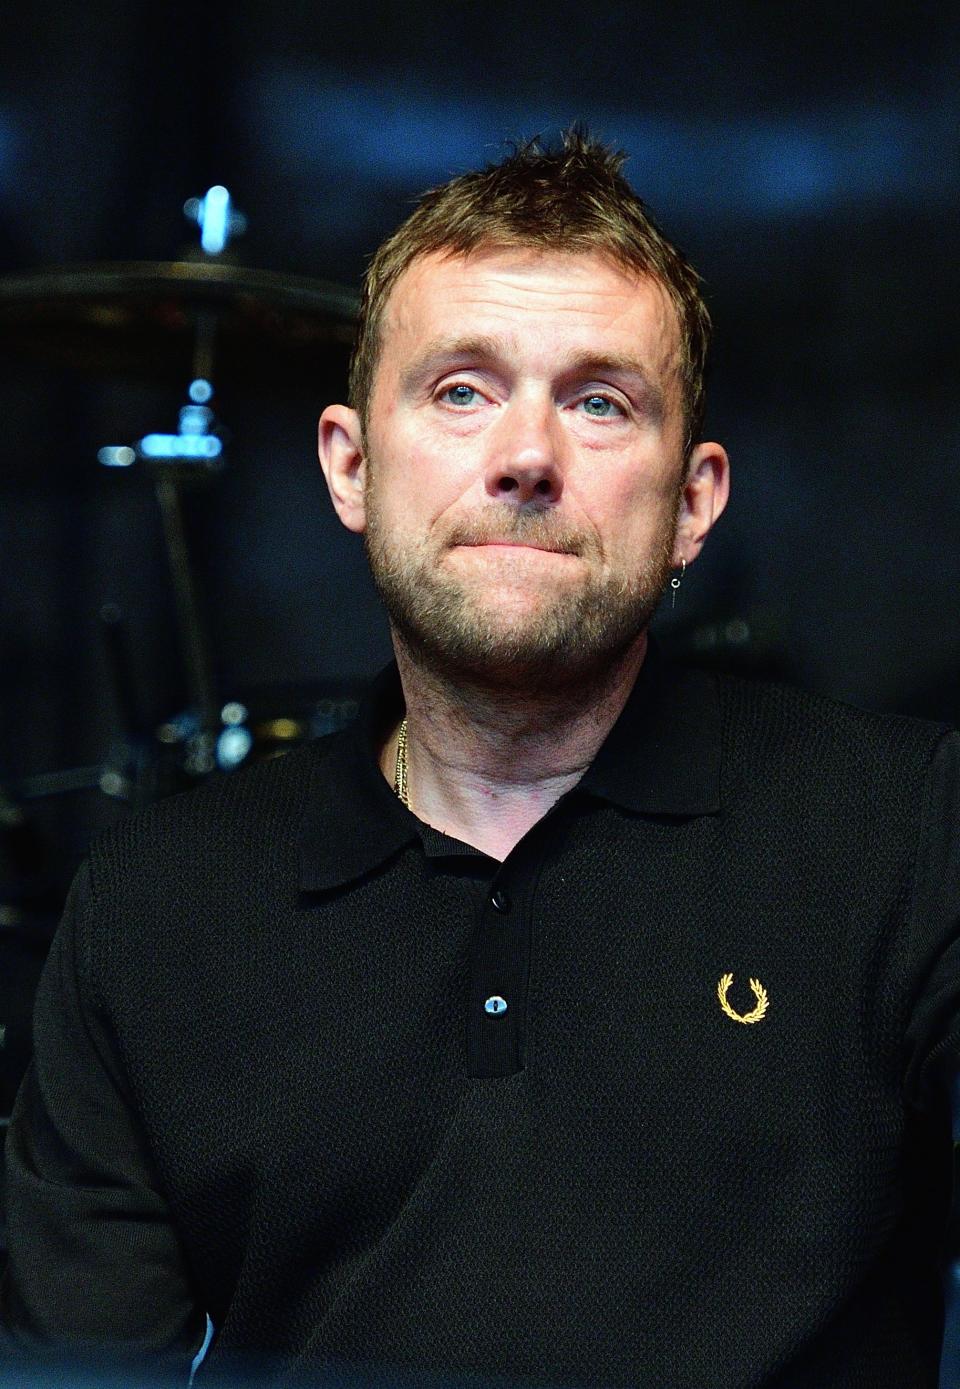 Damon Albarn smiles while on stage, wearing all black